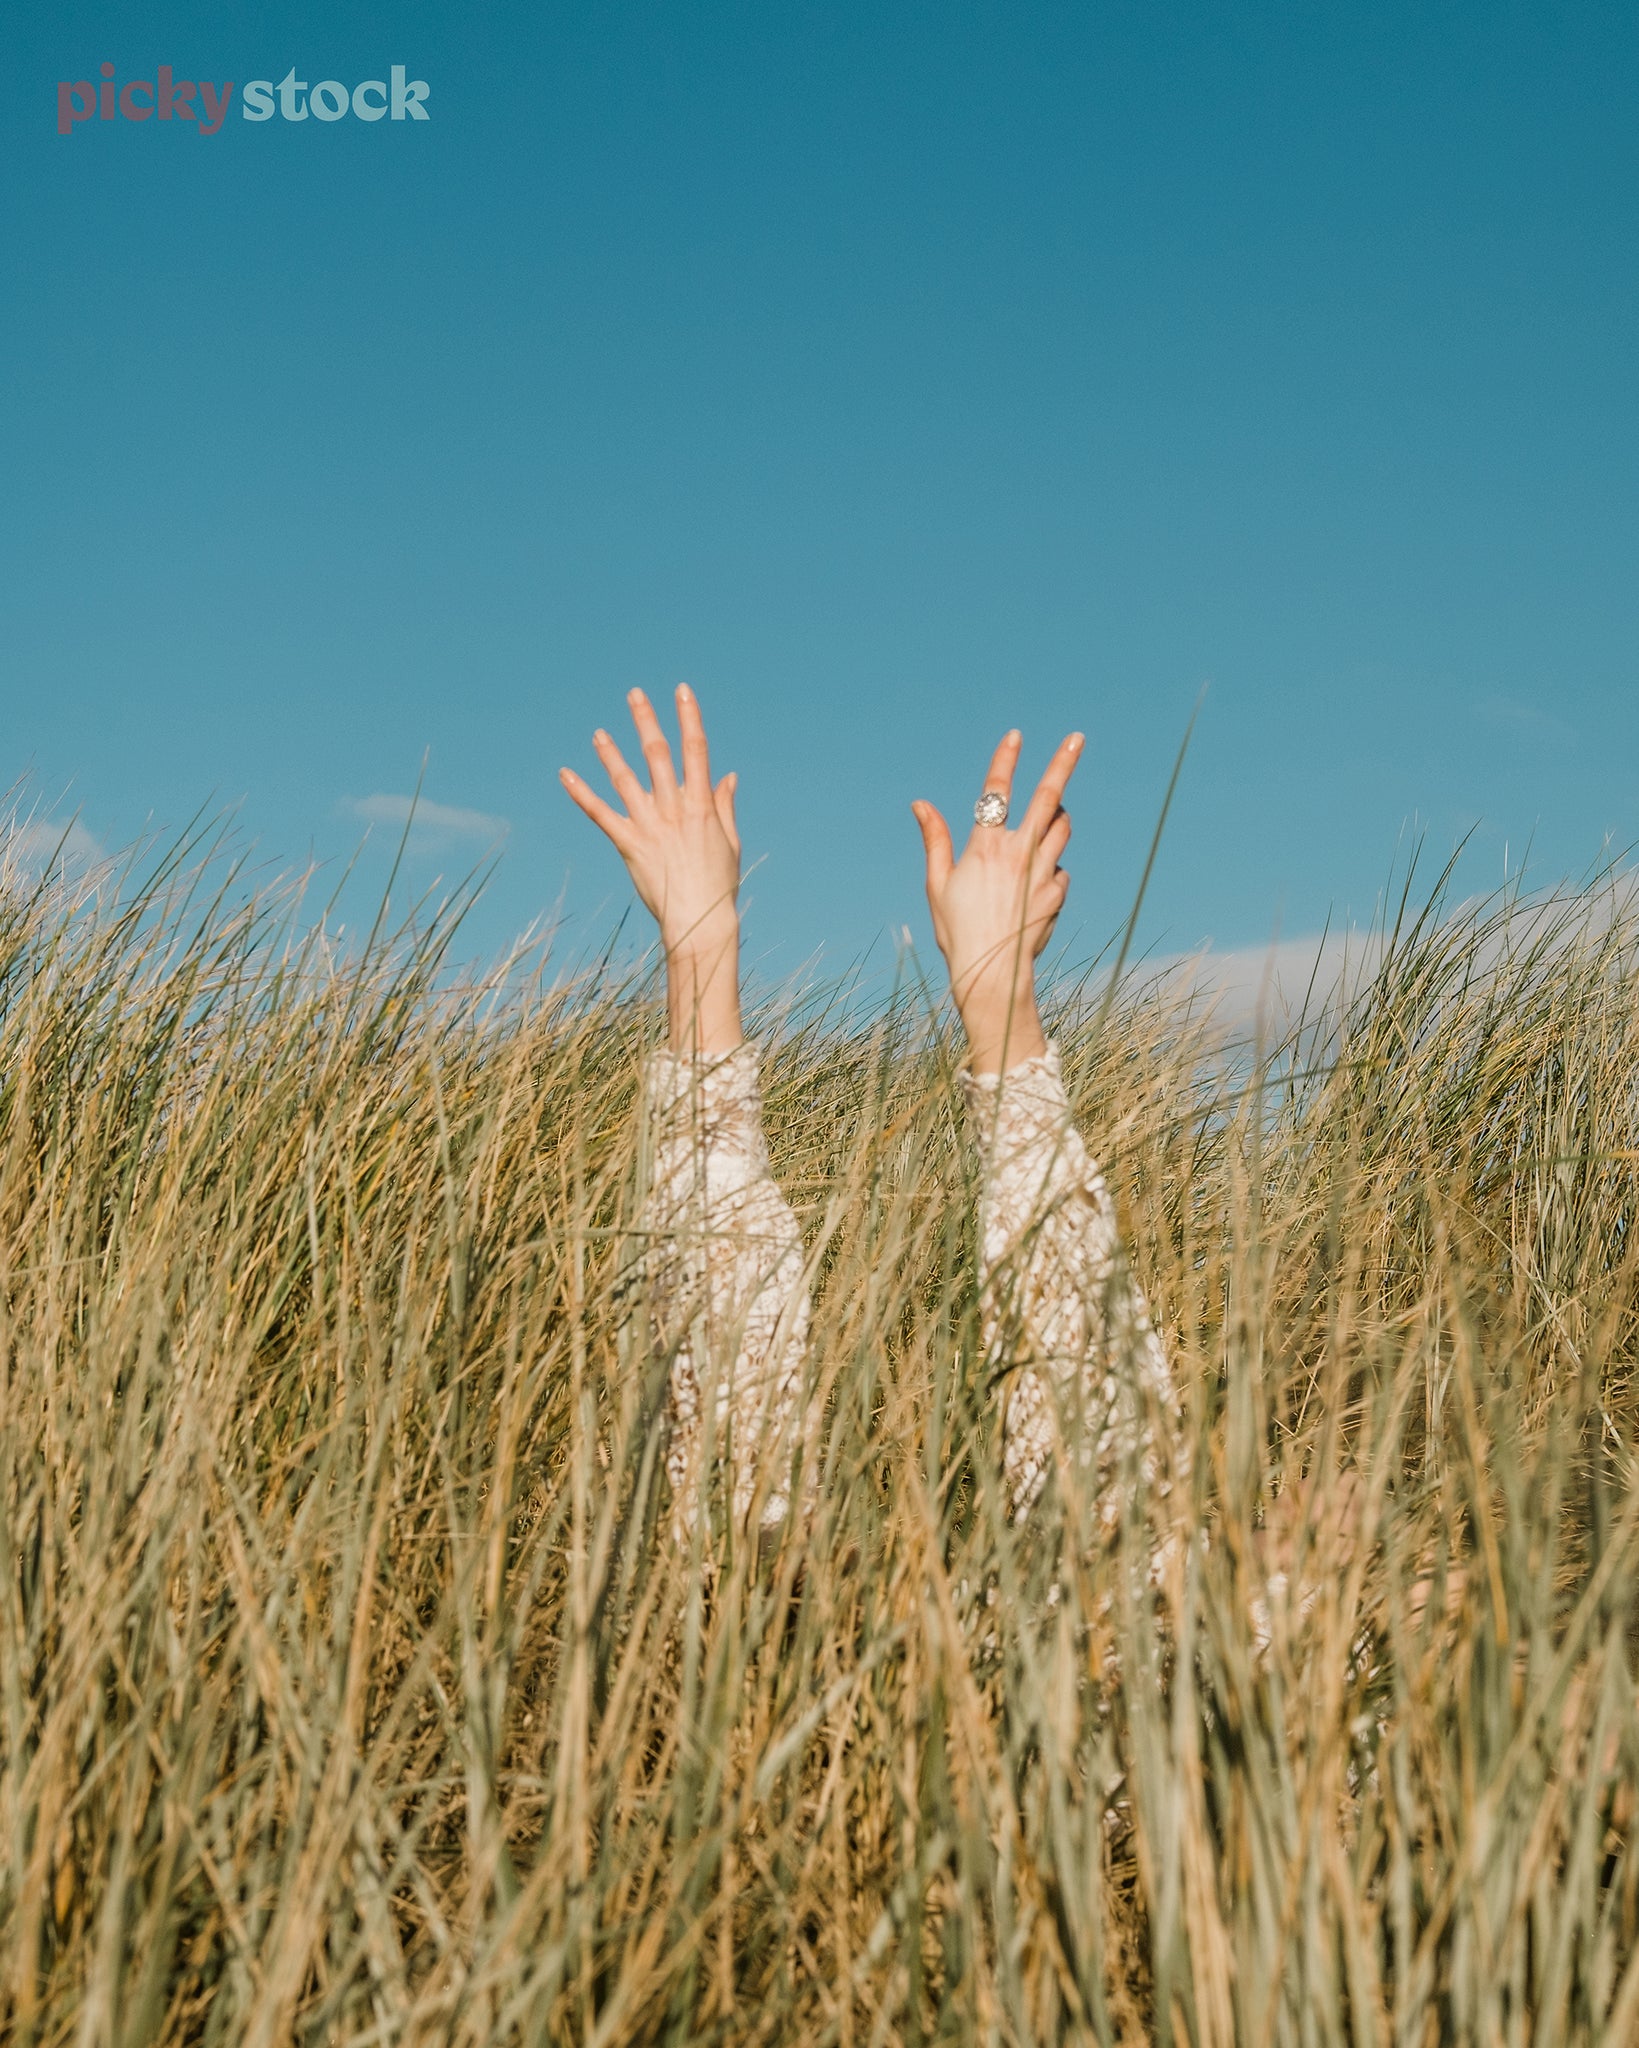 An editorial-style image of a young lady holding her arms up out of headlength thick flax plants. Her hands gracefully reach for the bright blue sky. 